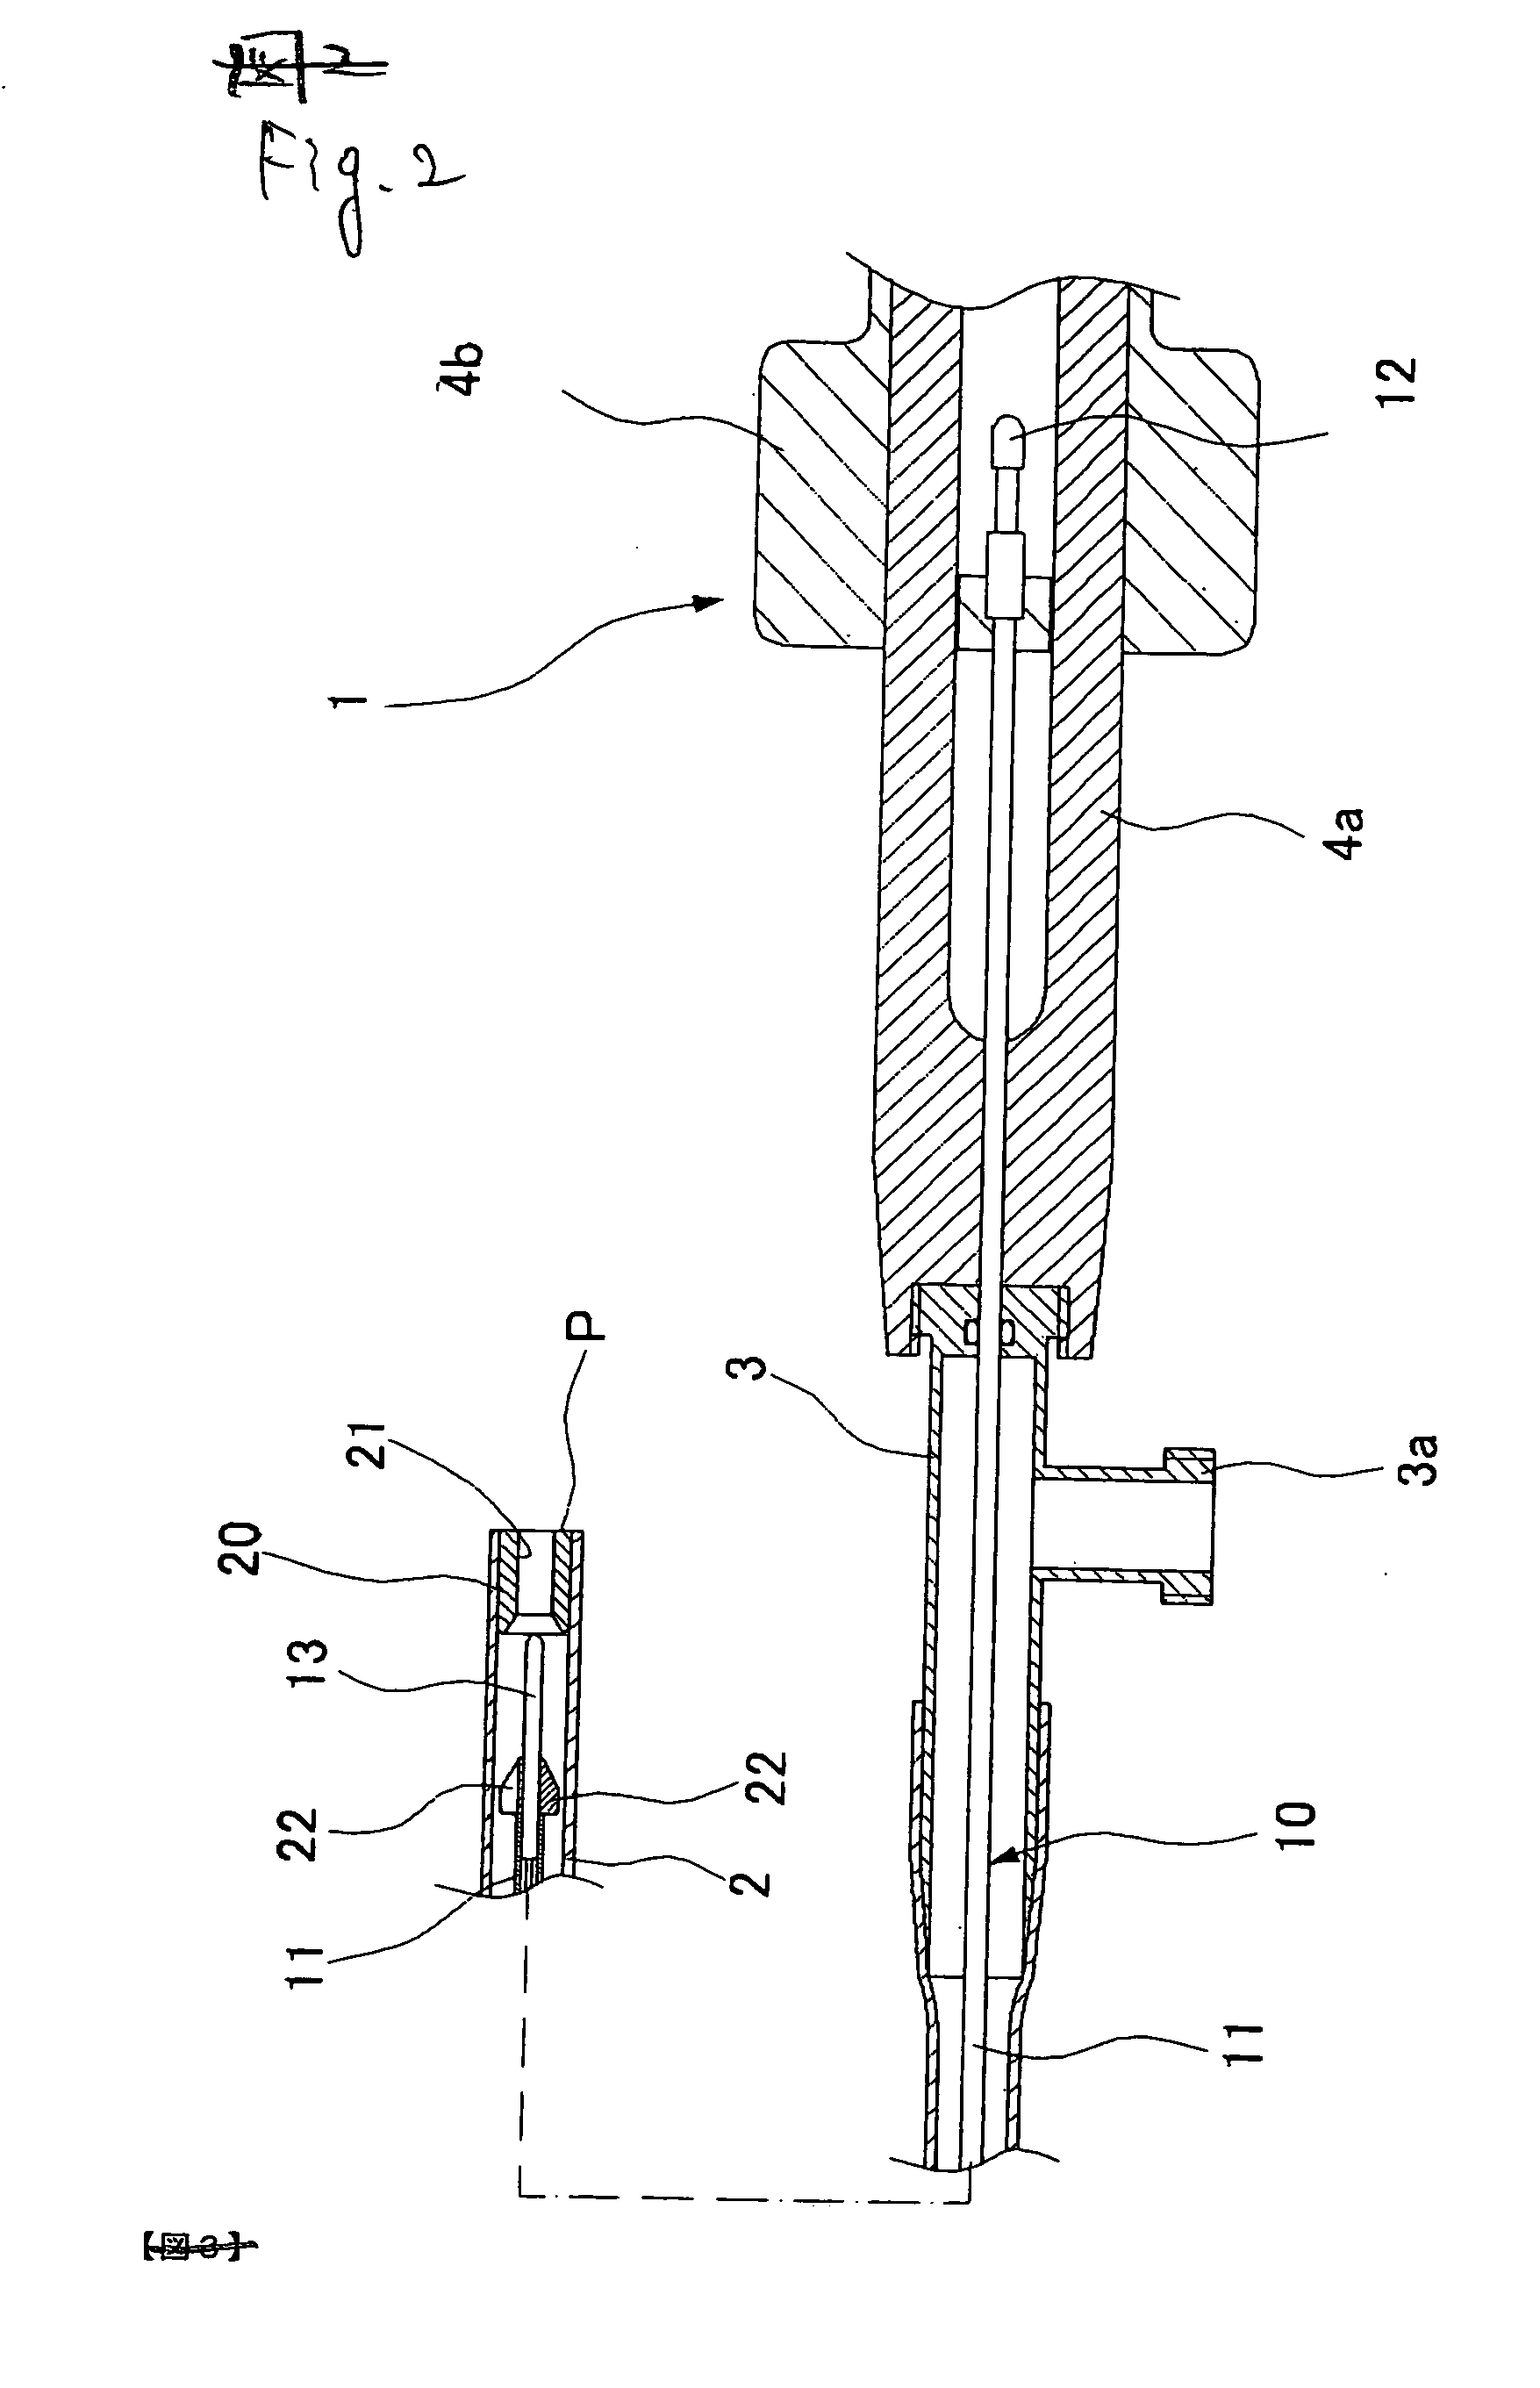 High-frequency treatment tool